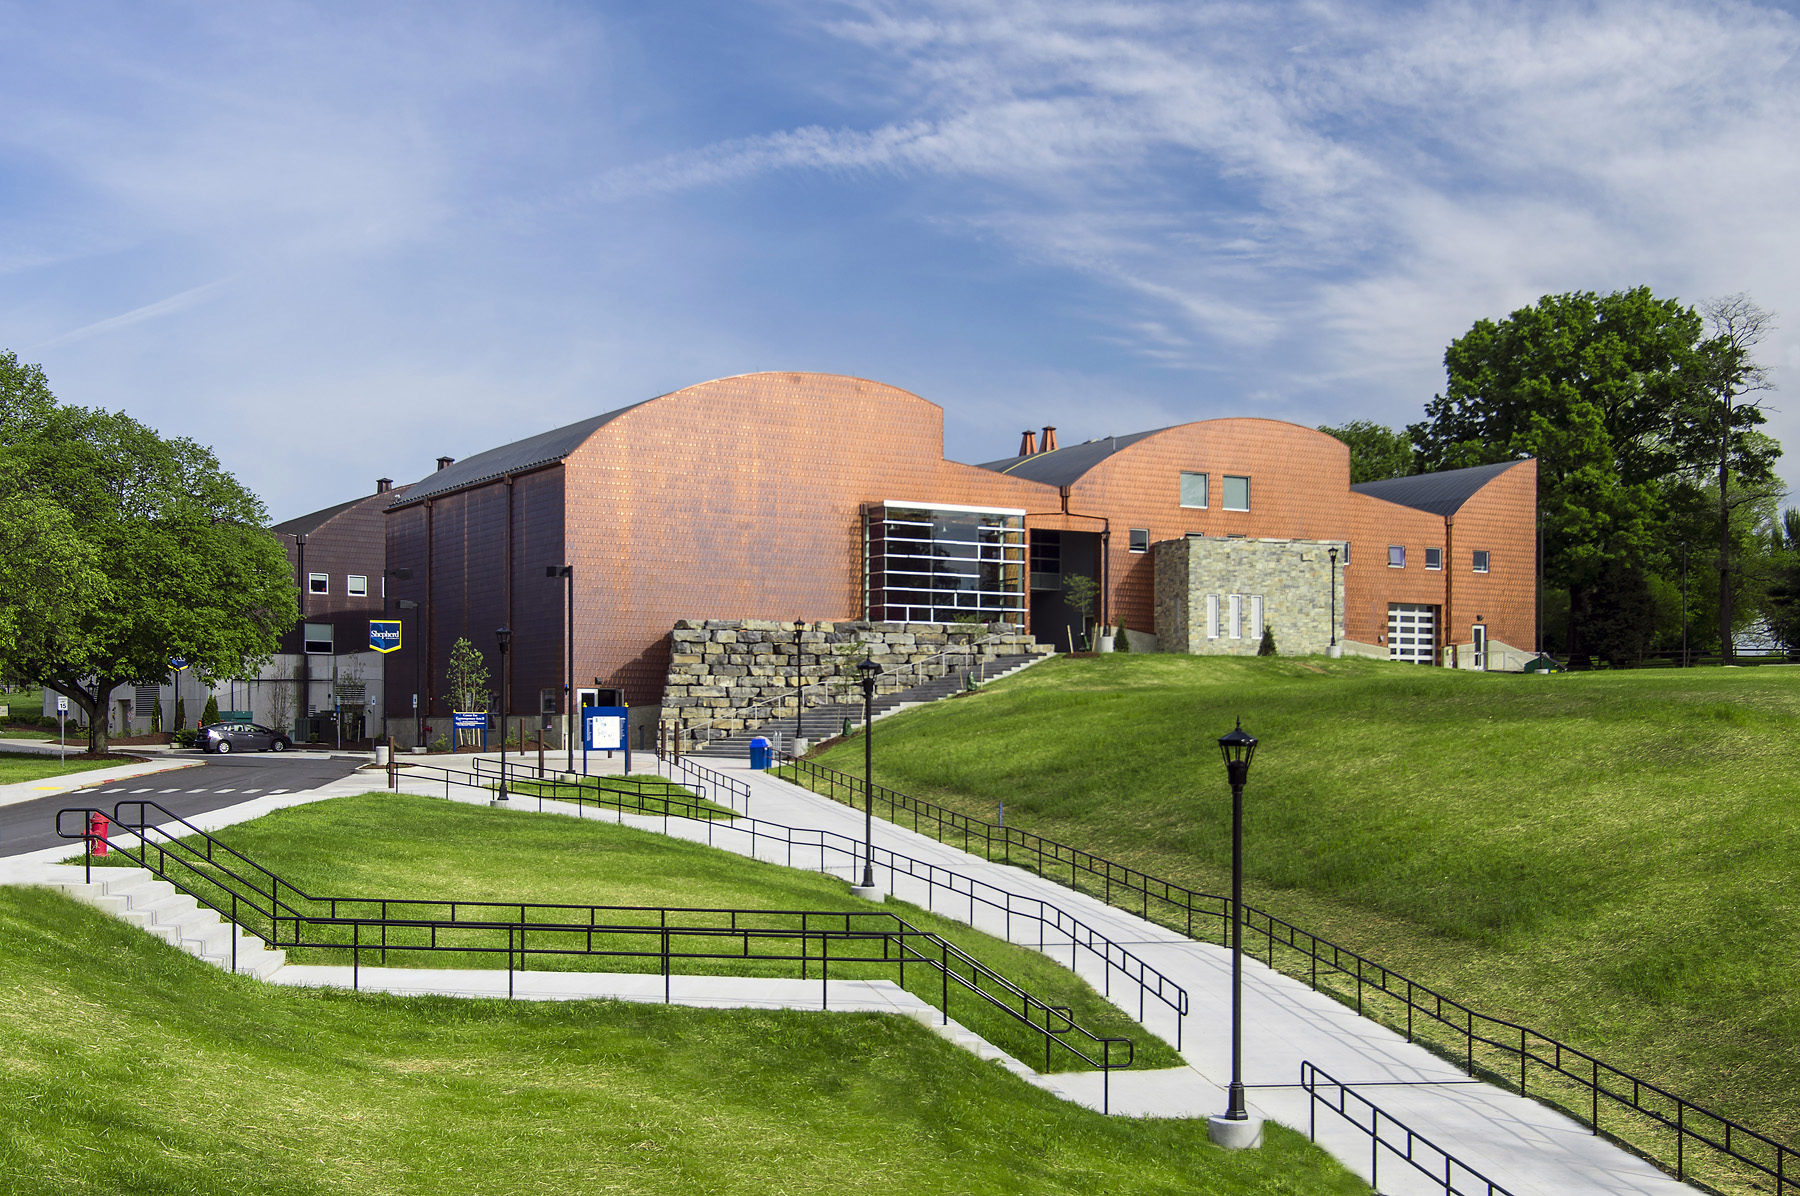 Learn How Specialty Construction Services Complement Design Concepts at Shepherd University Center of Contemporary Arts. Contact TEI today.